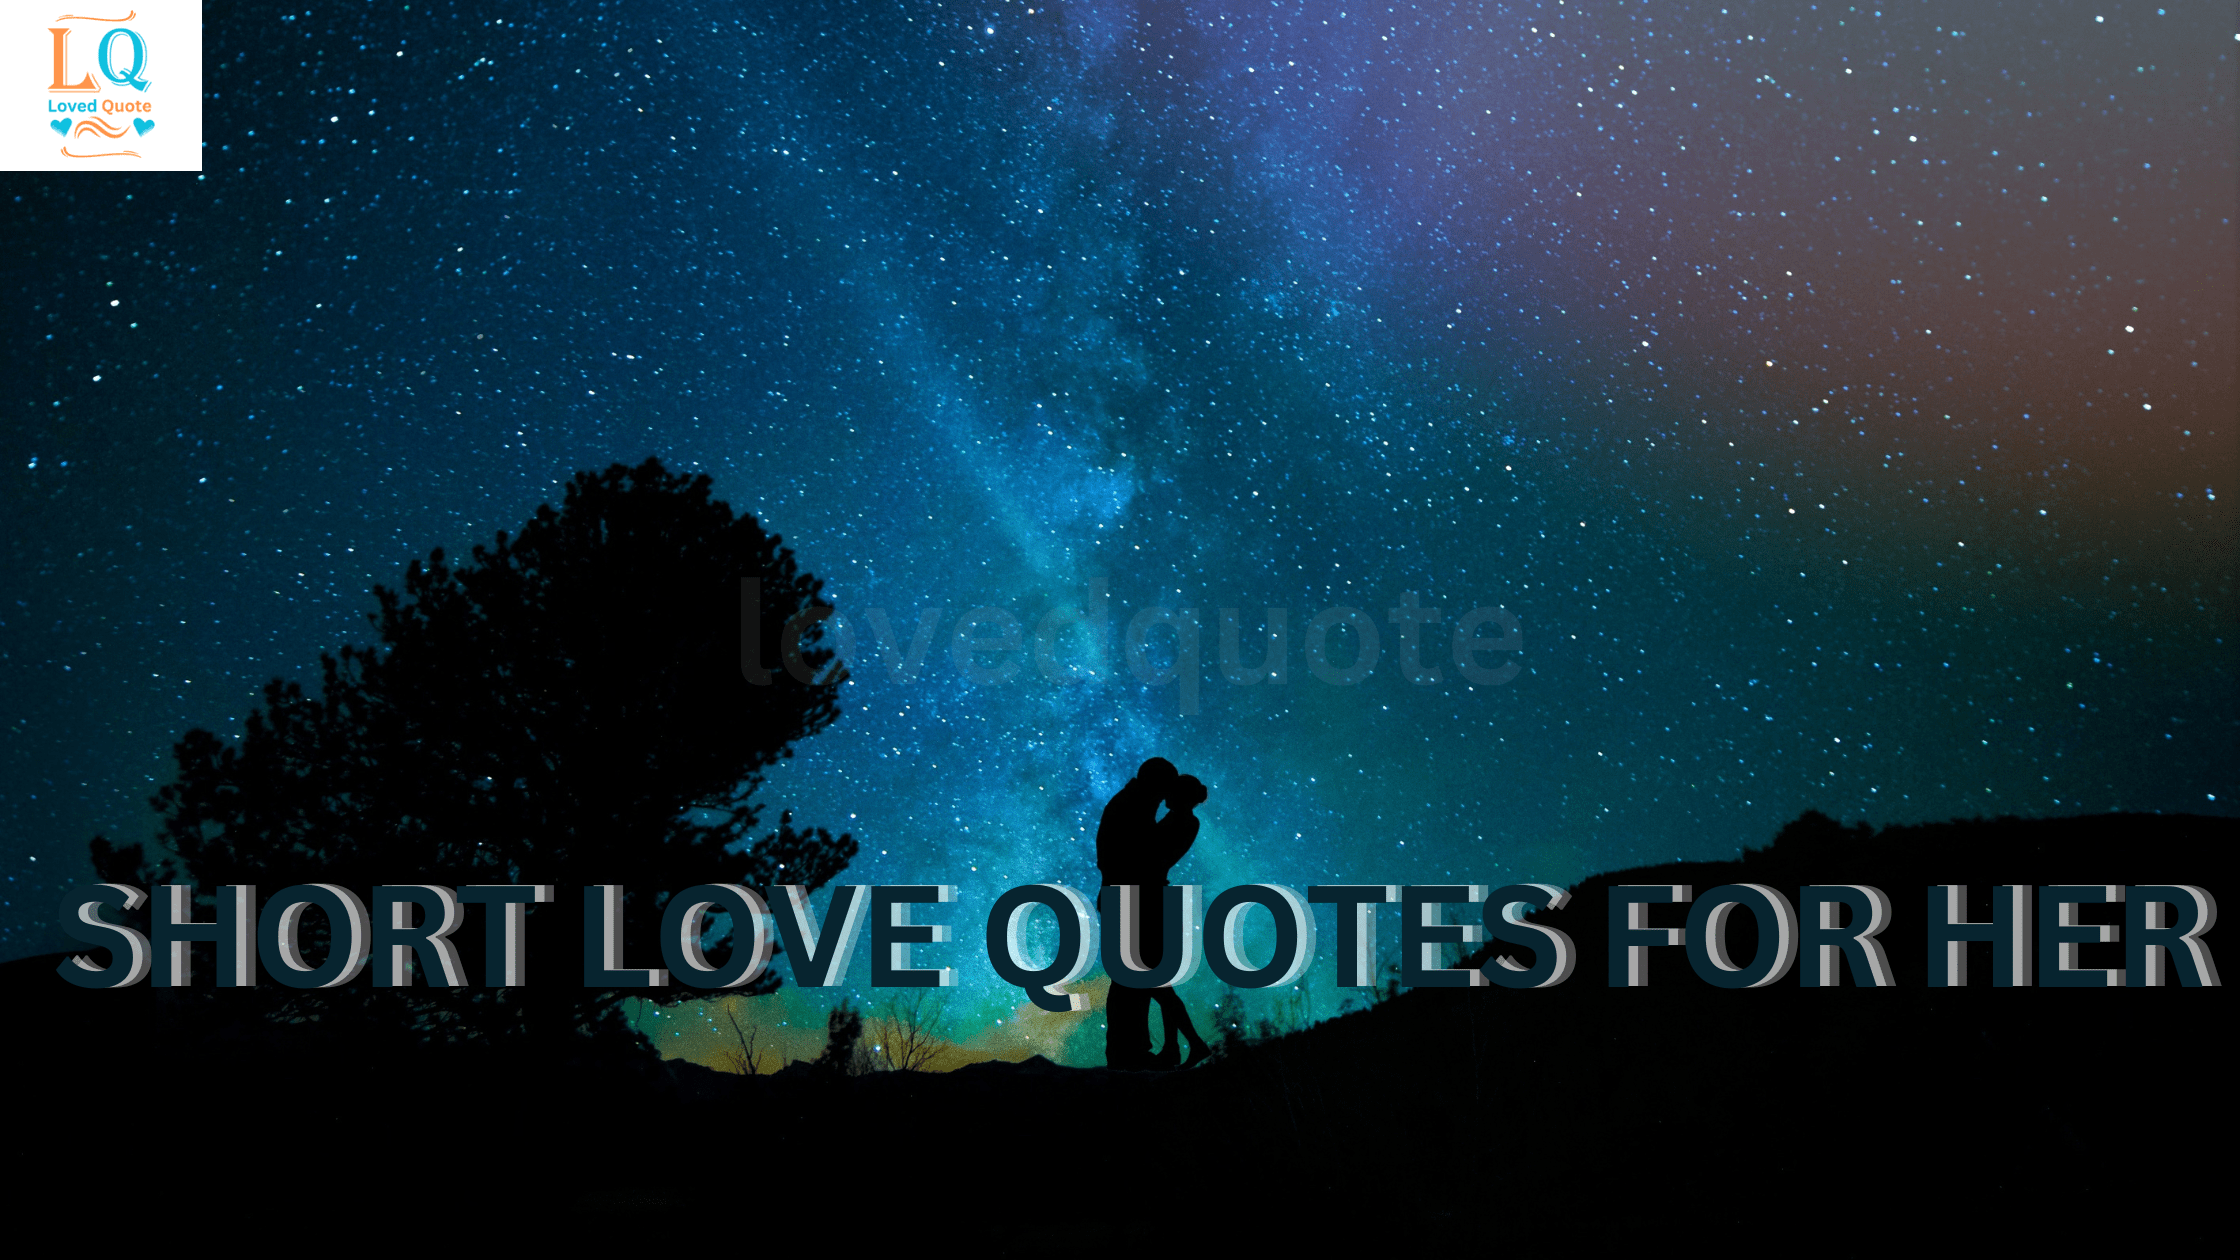 Short Love Quotes for Her